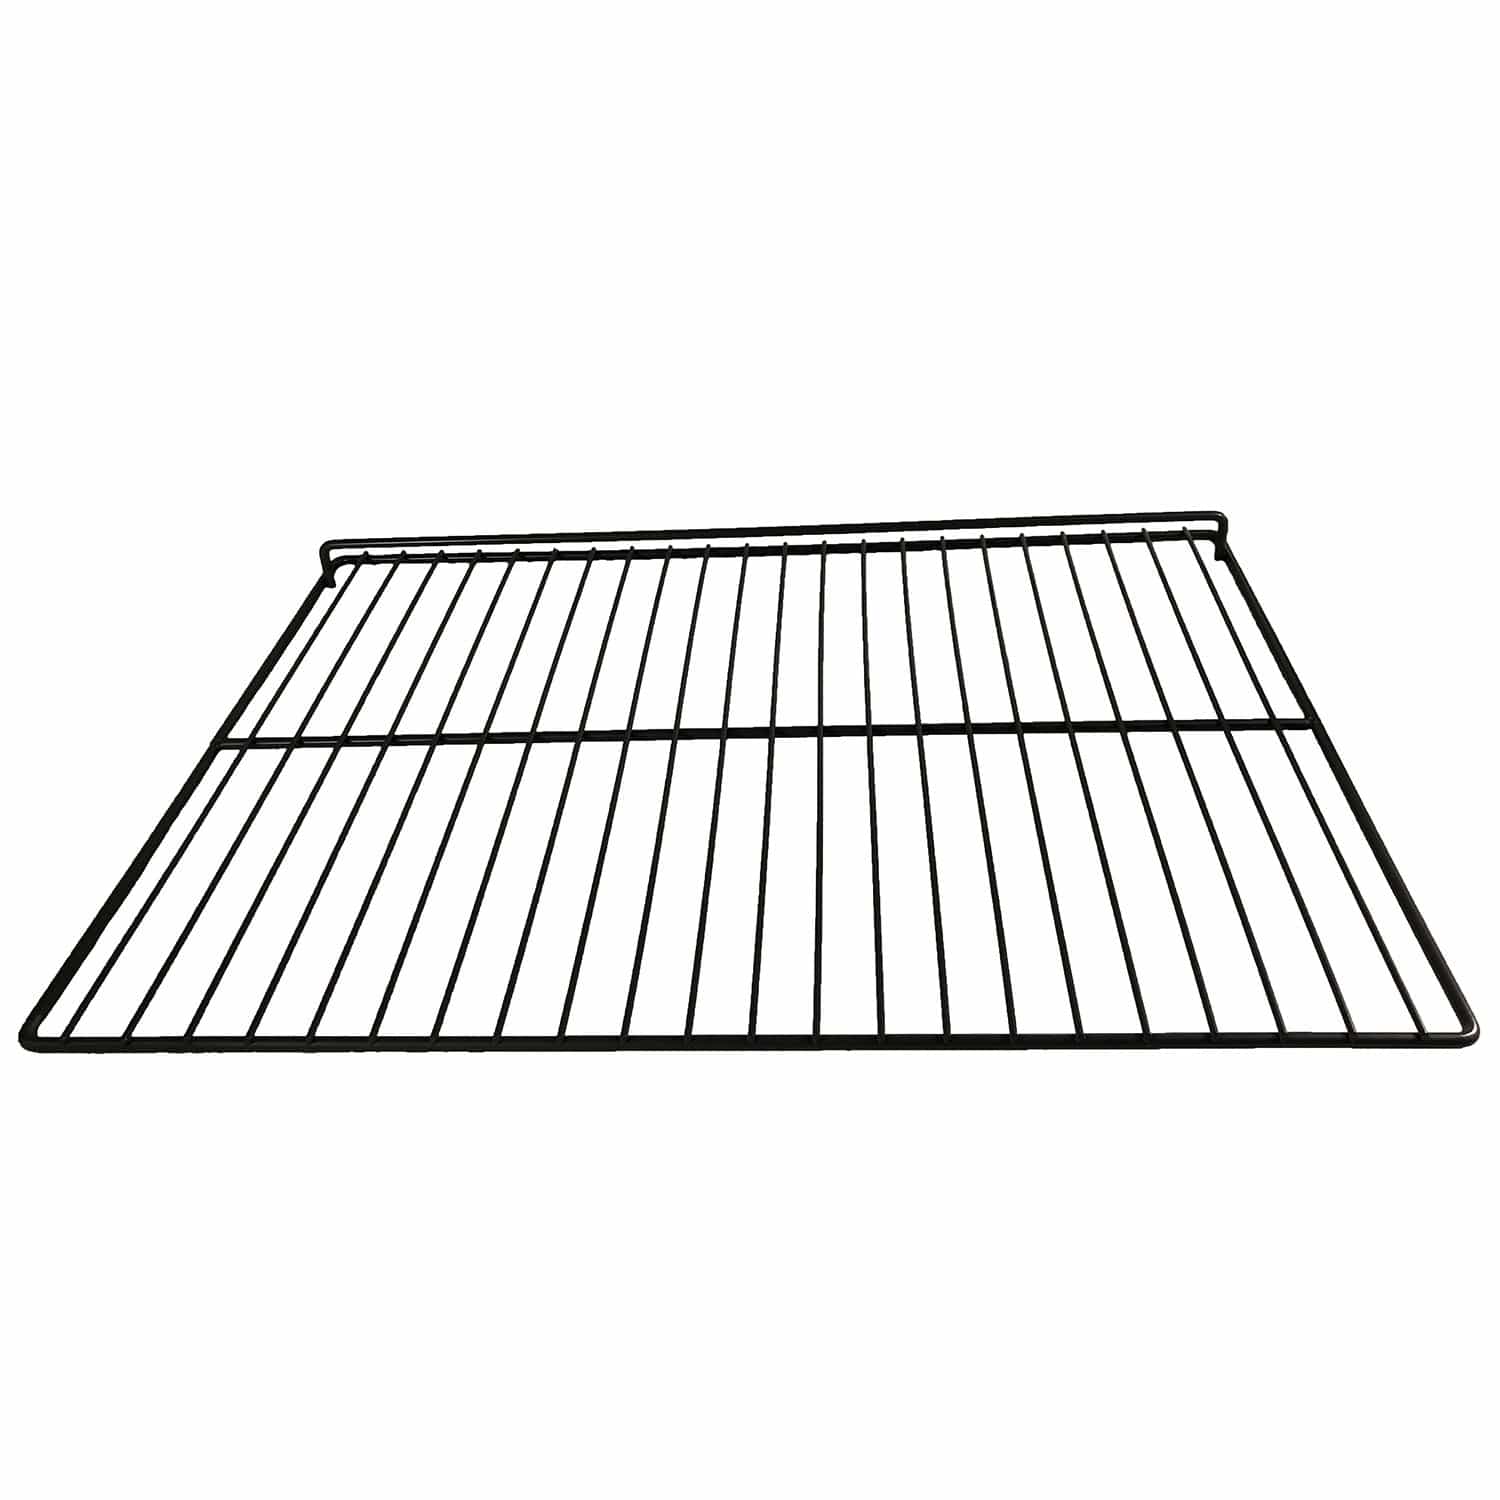 All Points F10152 Wire Shelf 22-1/2" X 16" Replaces Delfield 3978271